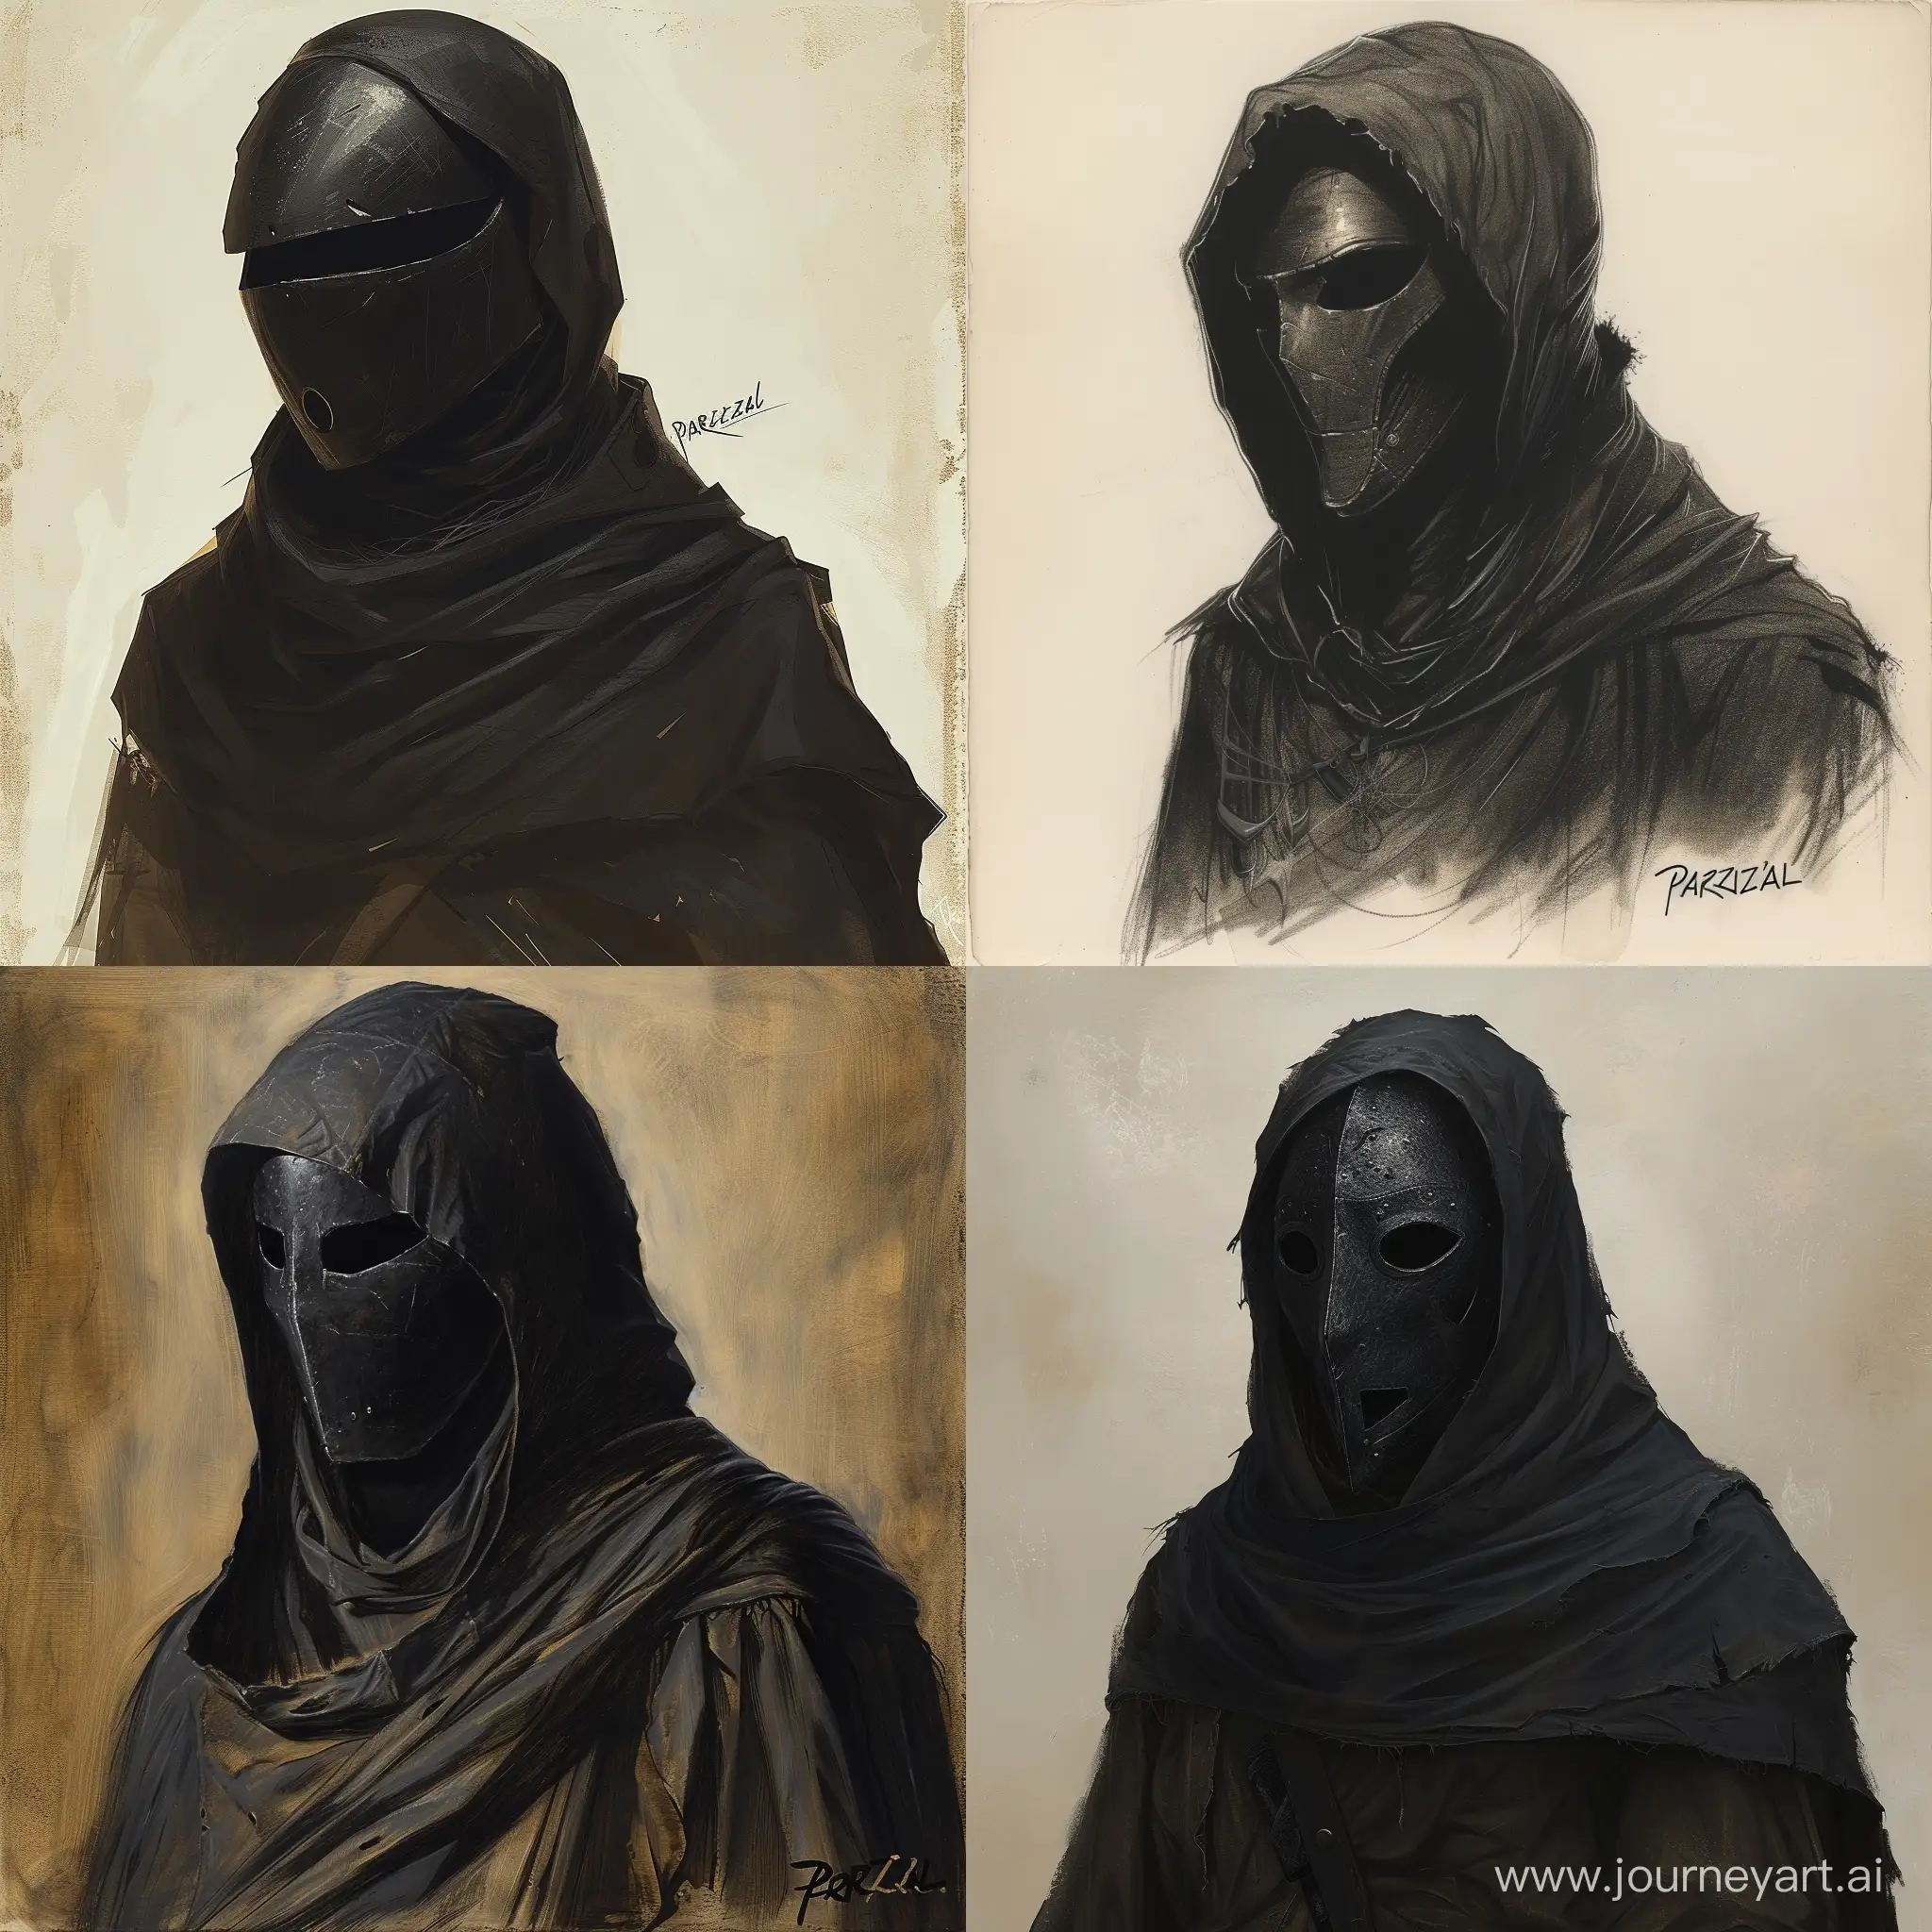 Mysterious-Soldier-Parvizal-in-Black-Cloak-and-Iron-Mask